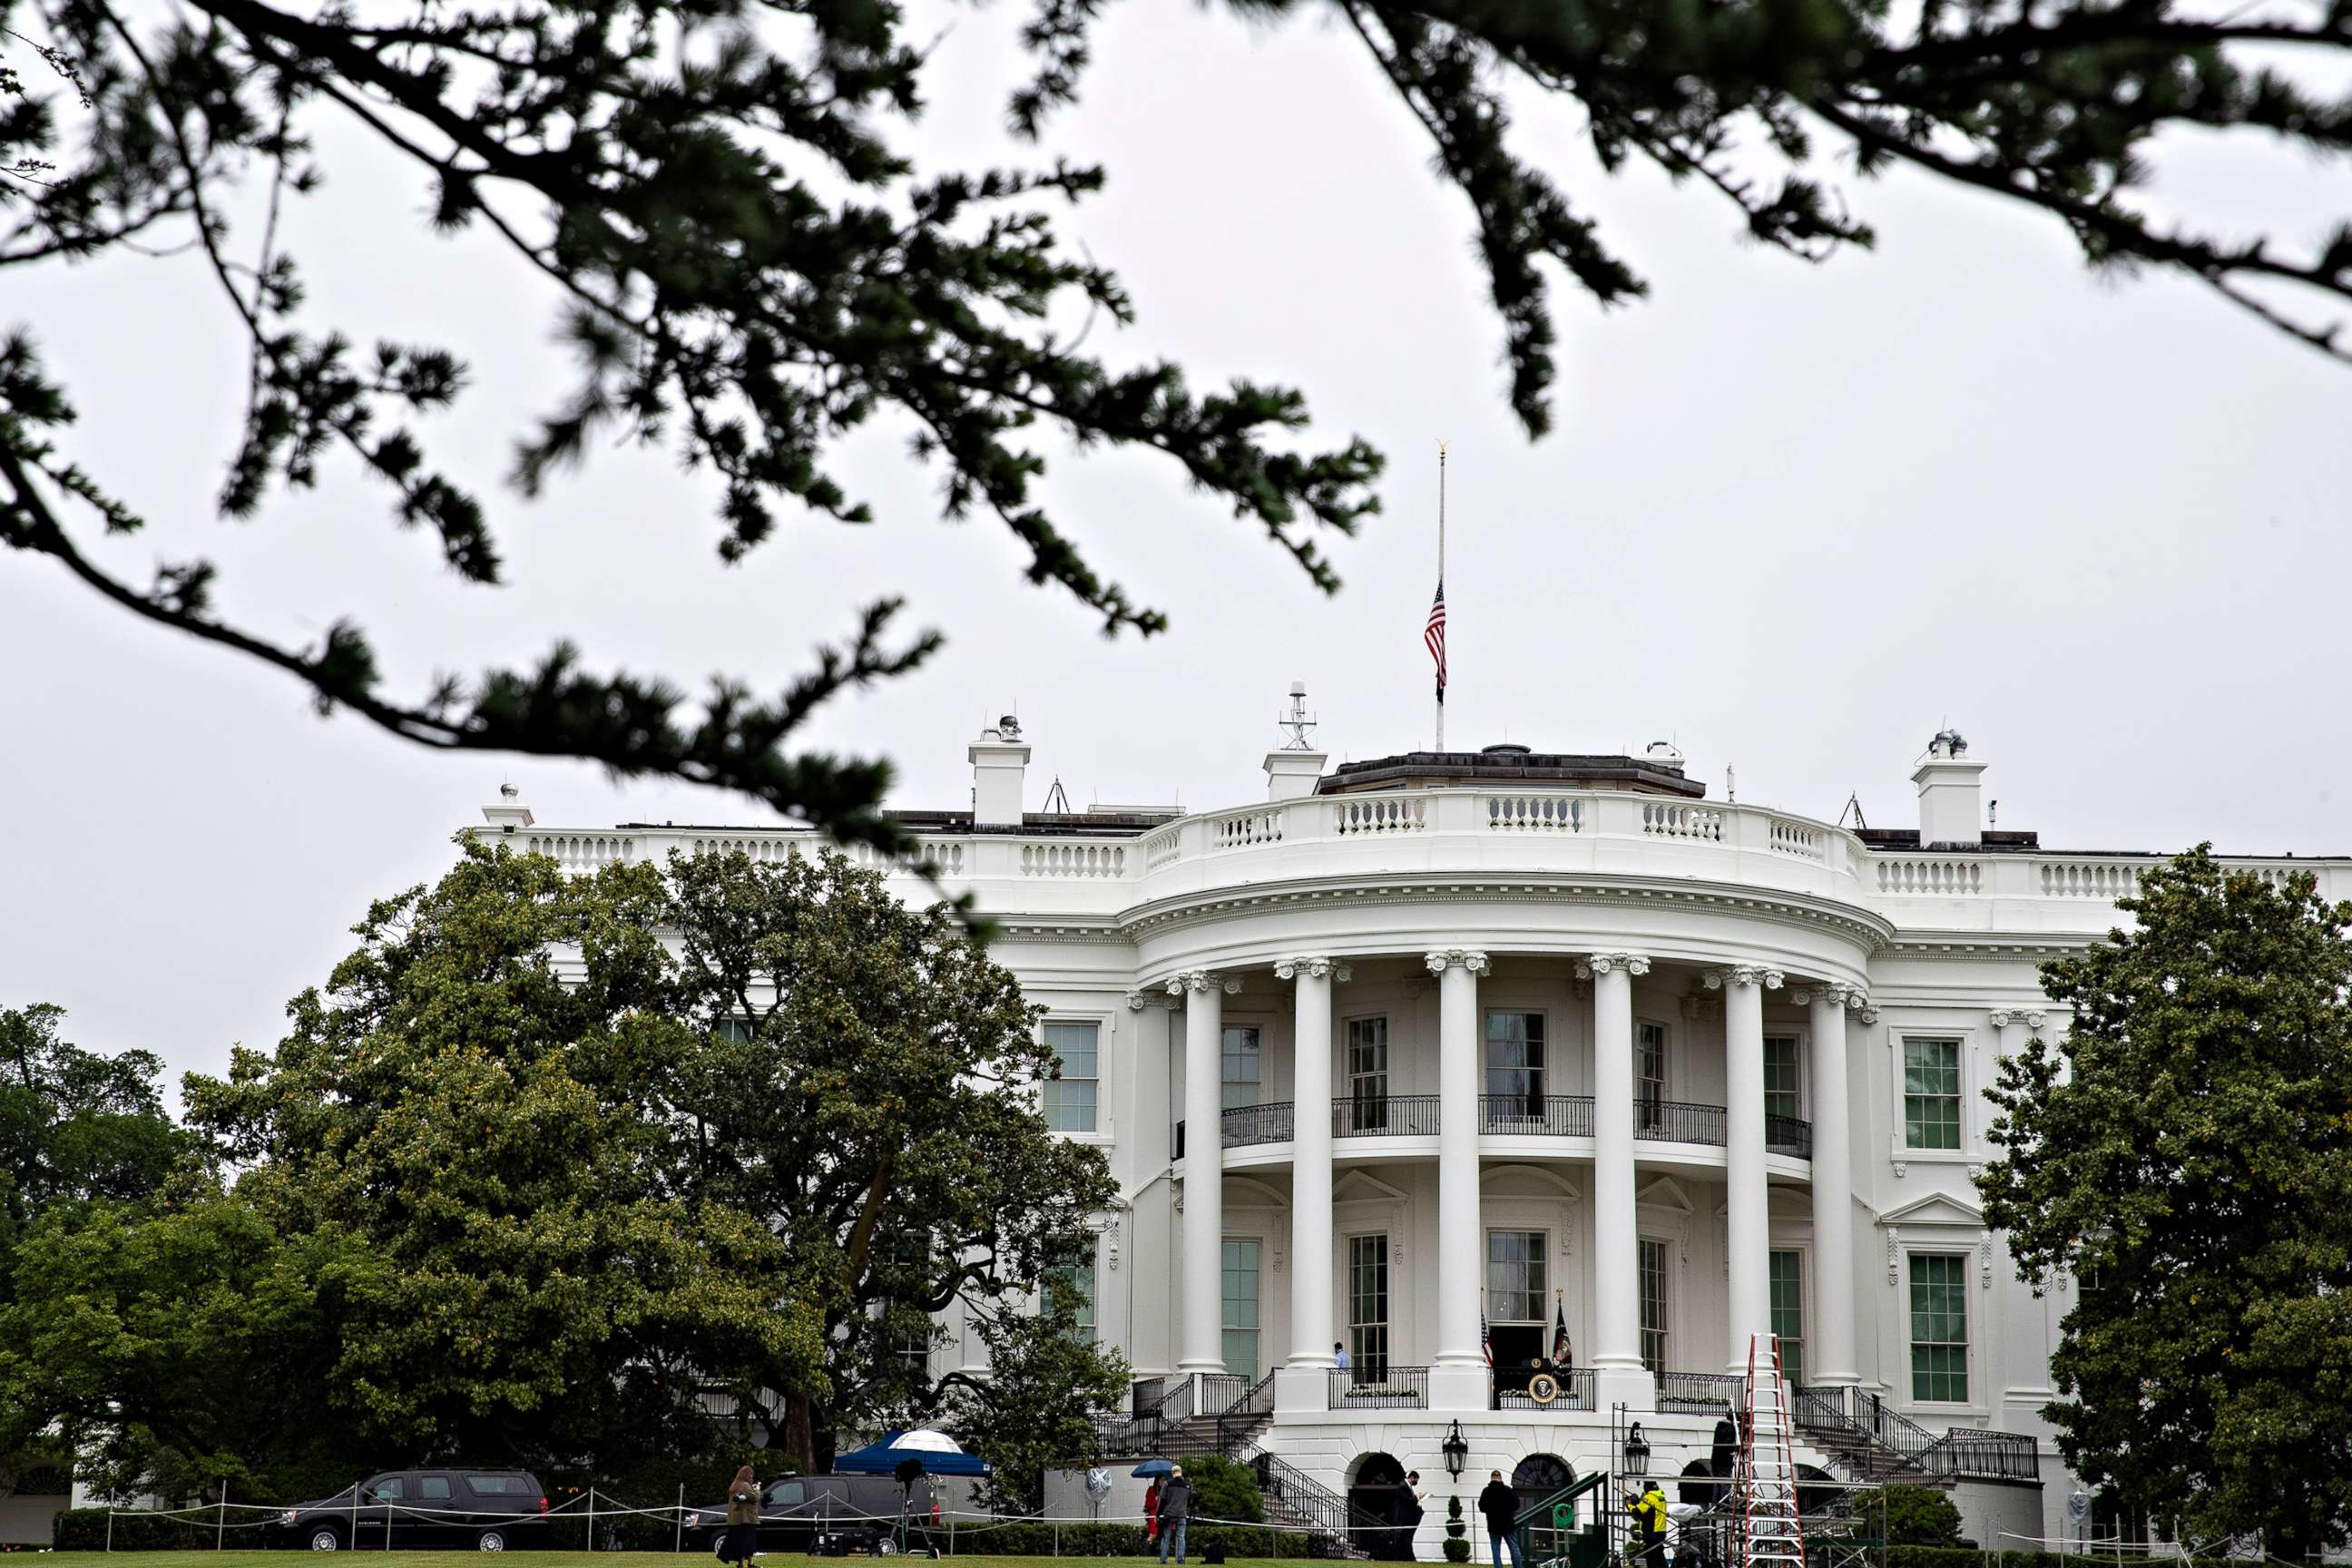 PHOTO: The flag on the roof of the White House flies at half-staff by order of President Donald Trump, "for every life lost to the coronavirus pandemic," May 22, 2020, in Washington.